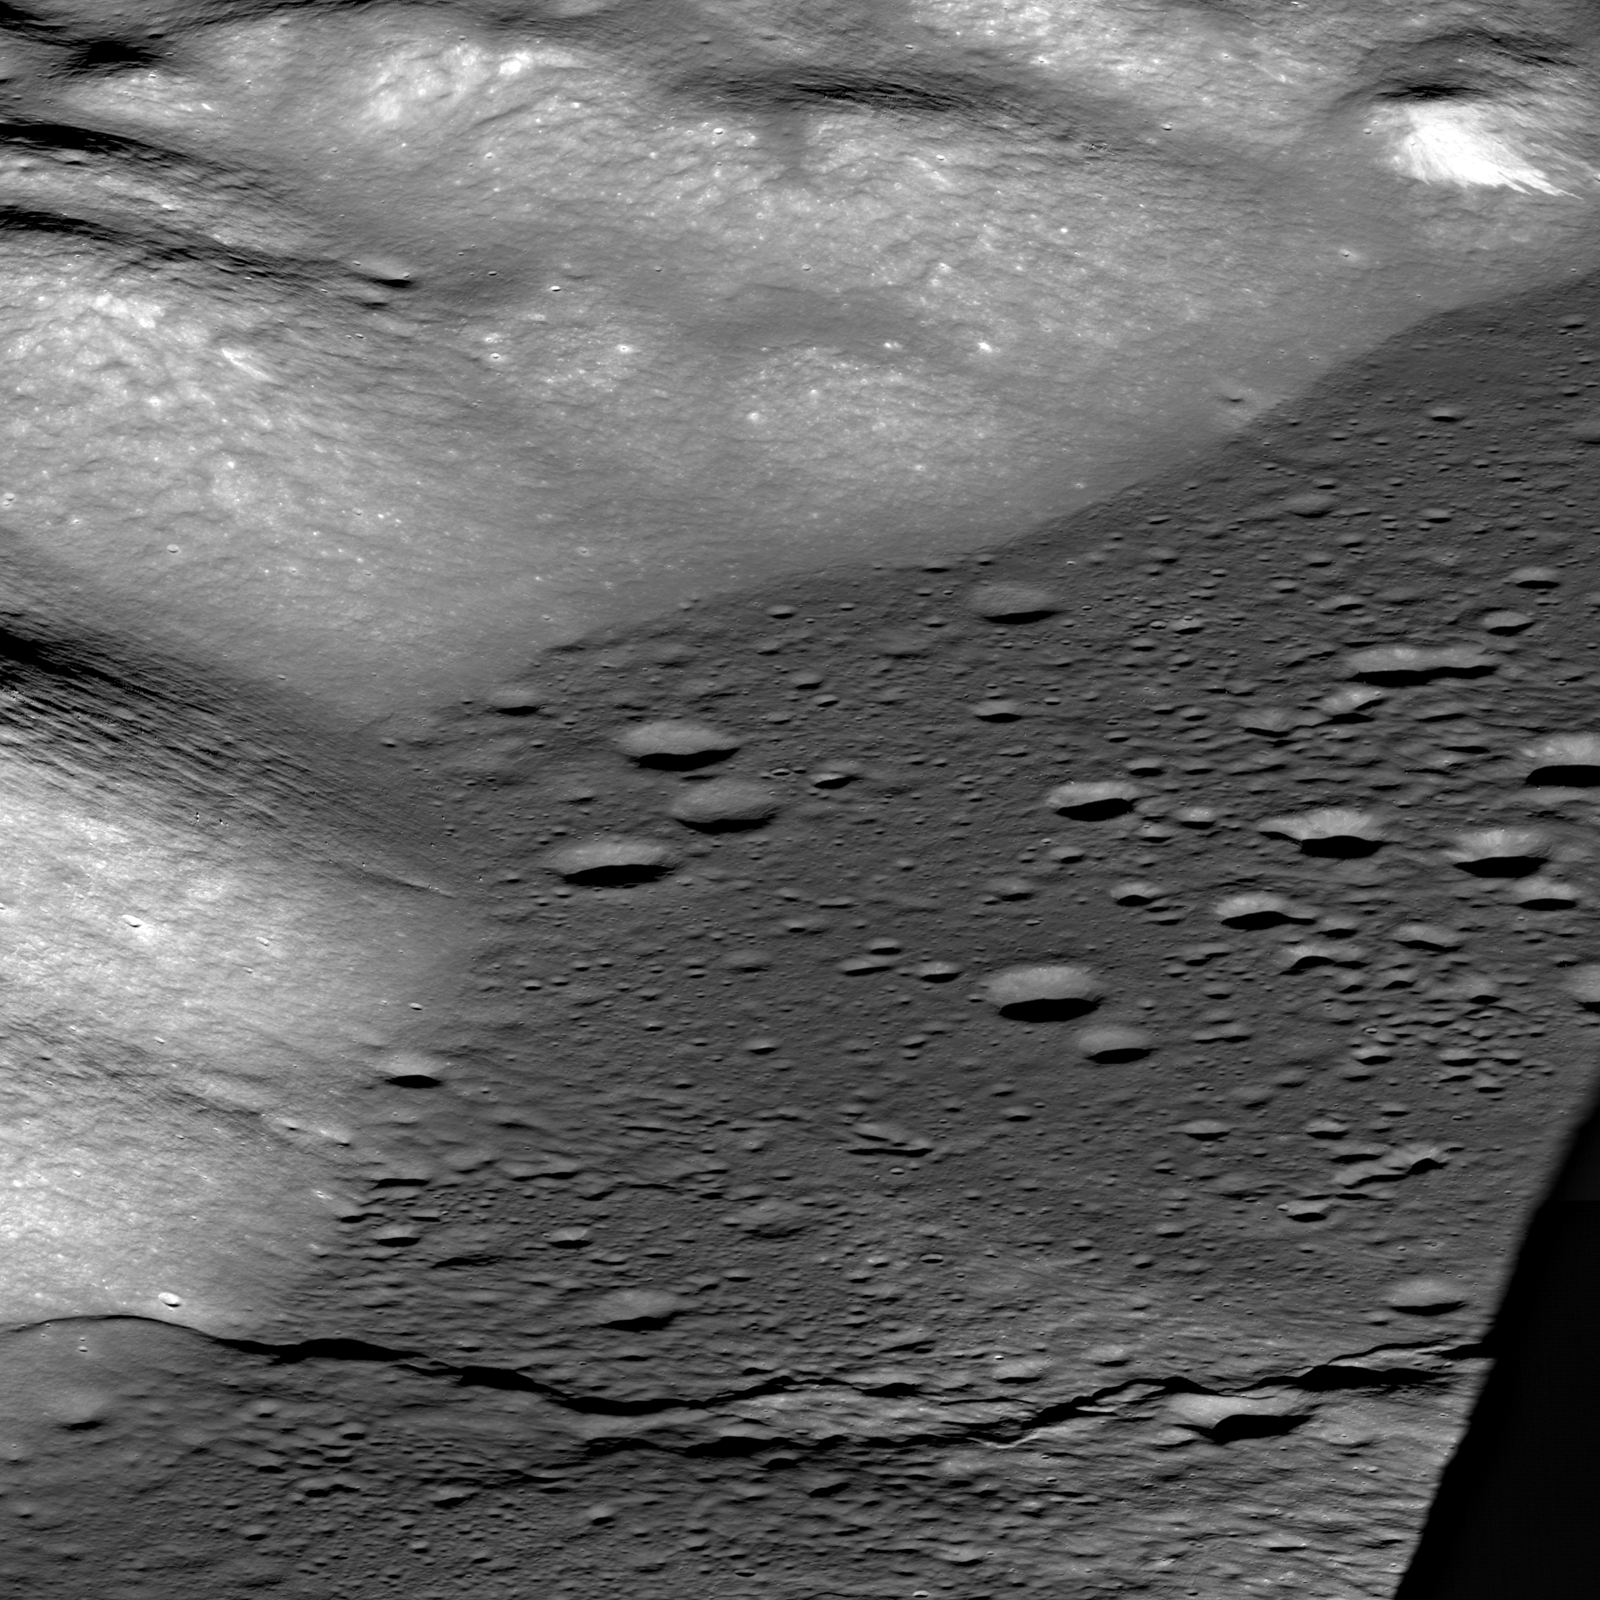 Taurus Littrow Valley, West-To-East